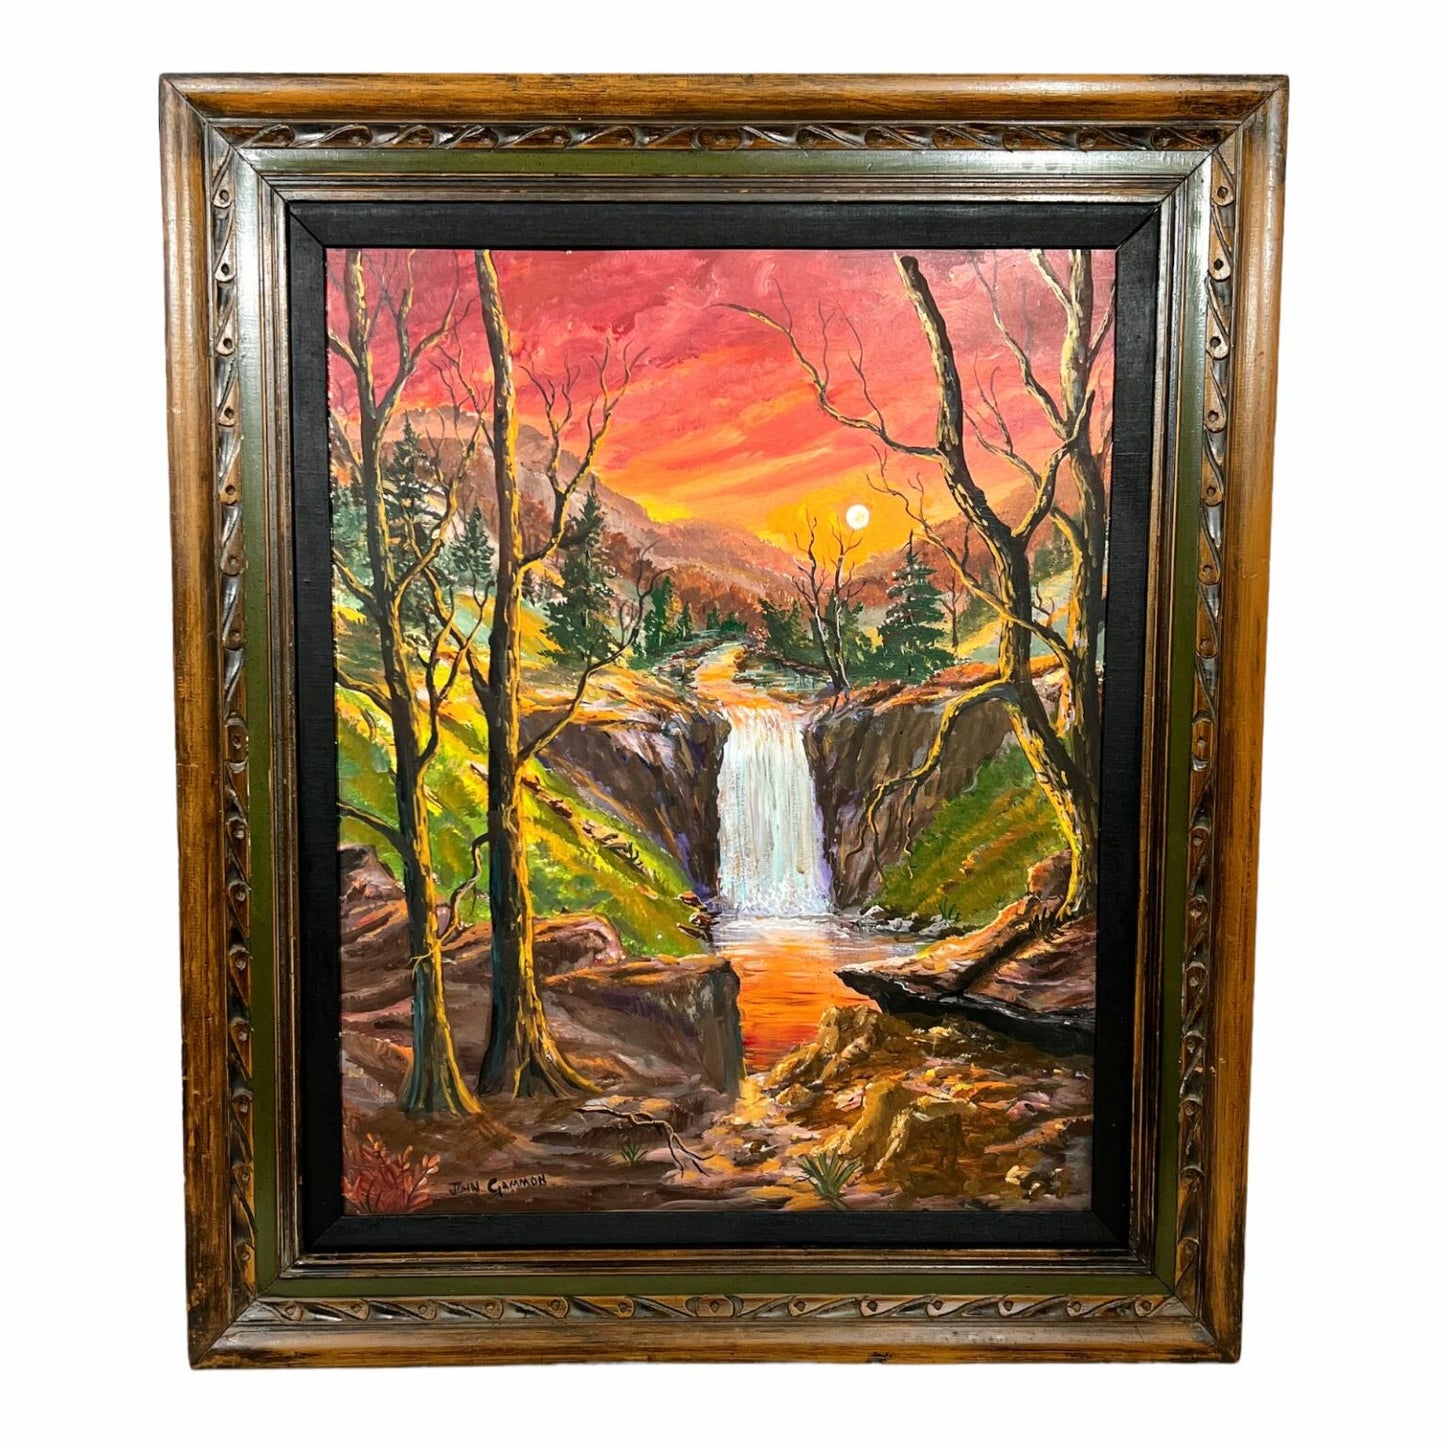 GIVEAWAY: John Gammon Original Acrylic on Canvas Sunset Forest Landscape Painting